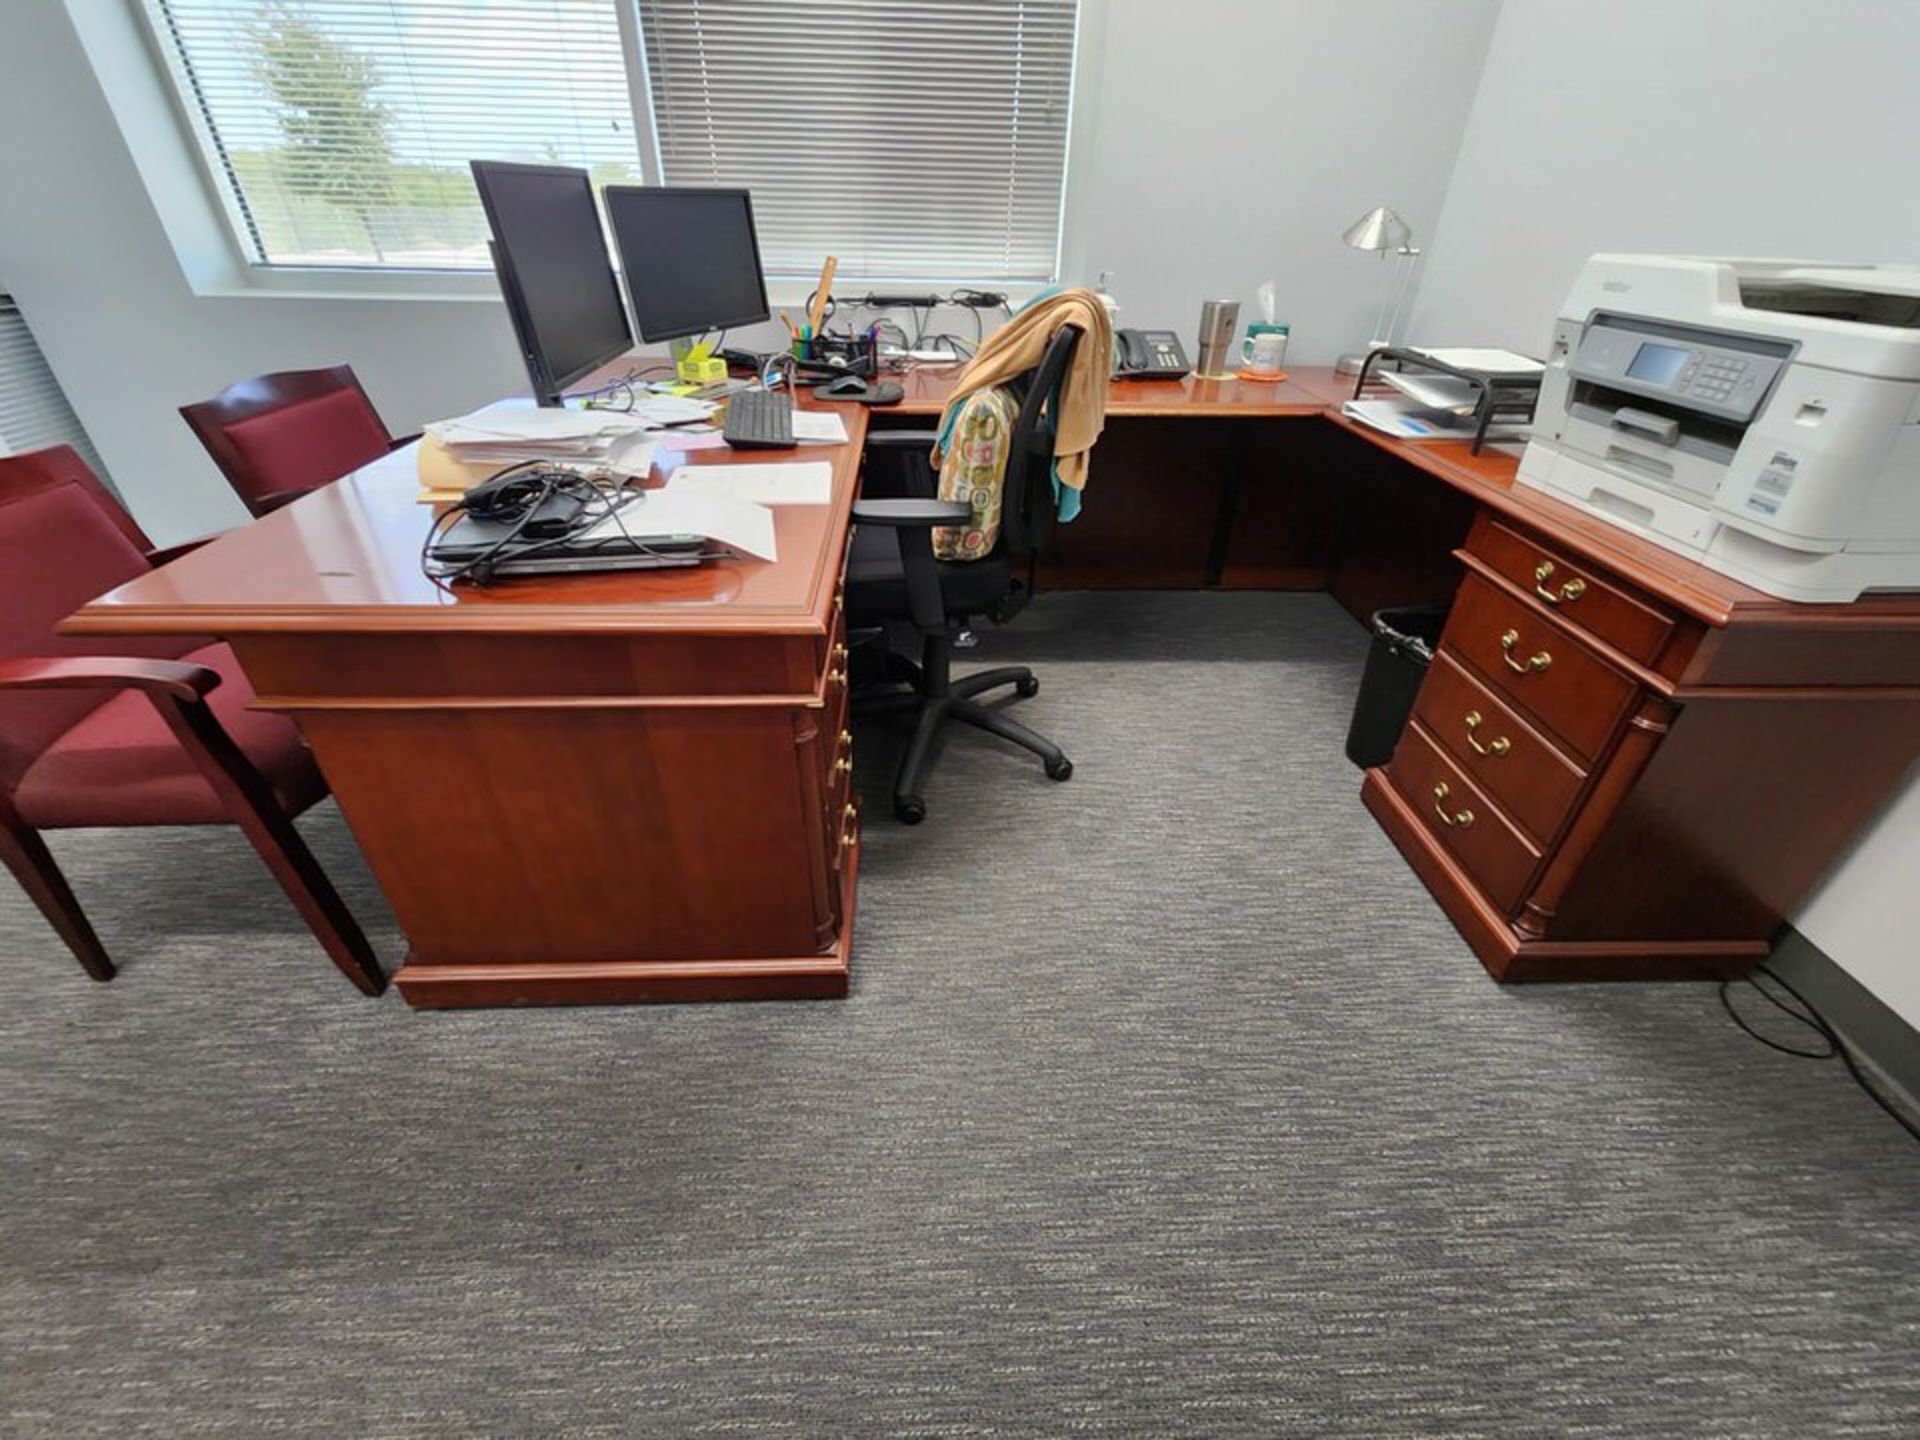 Office Furniture To Include But Not Limited To: Desk, Monitors, Keyboard & Mouse, etc. - Image 8 of 11